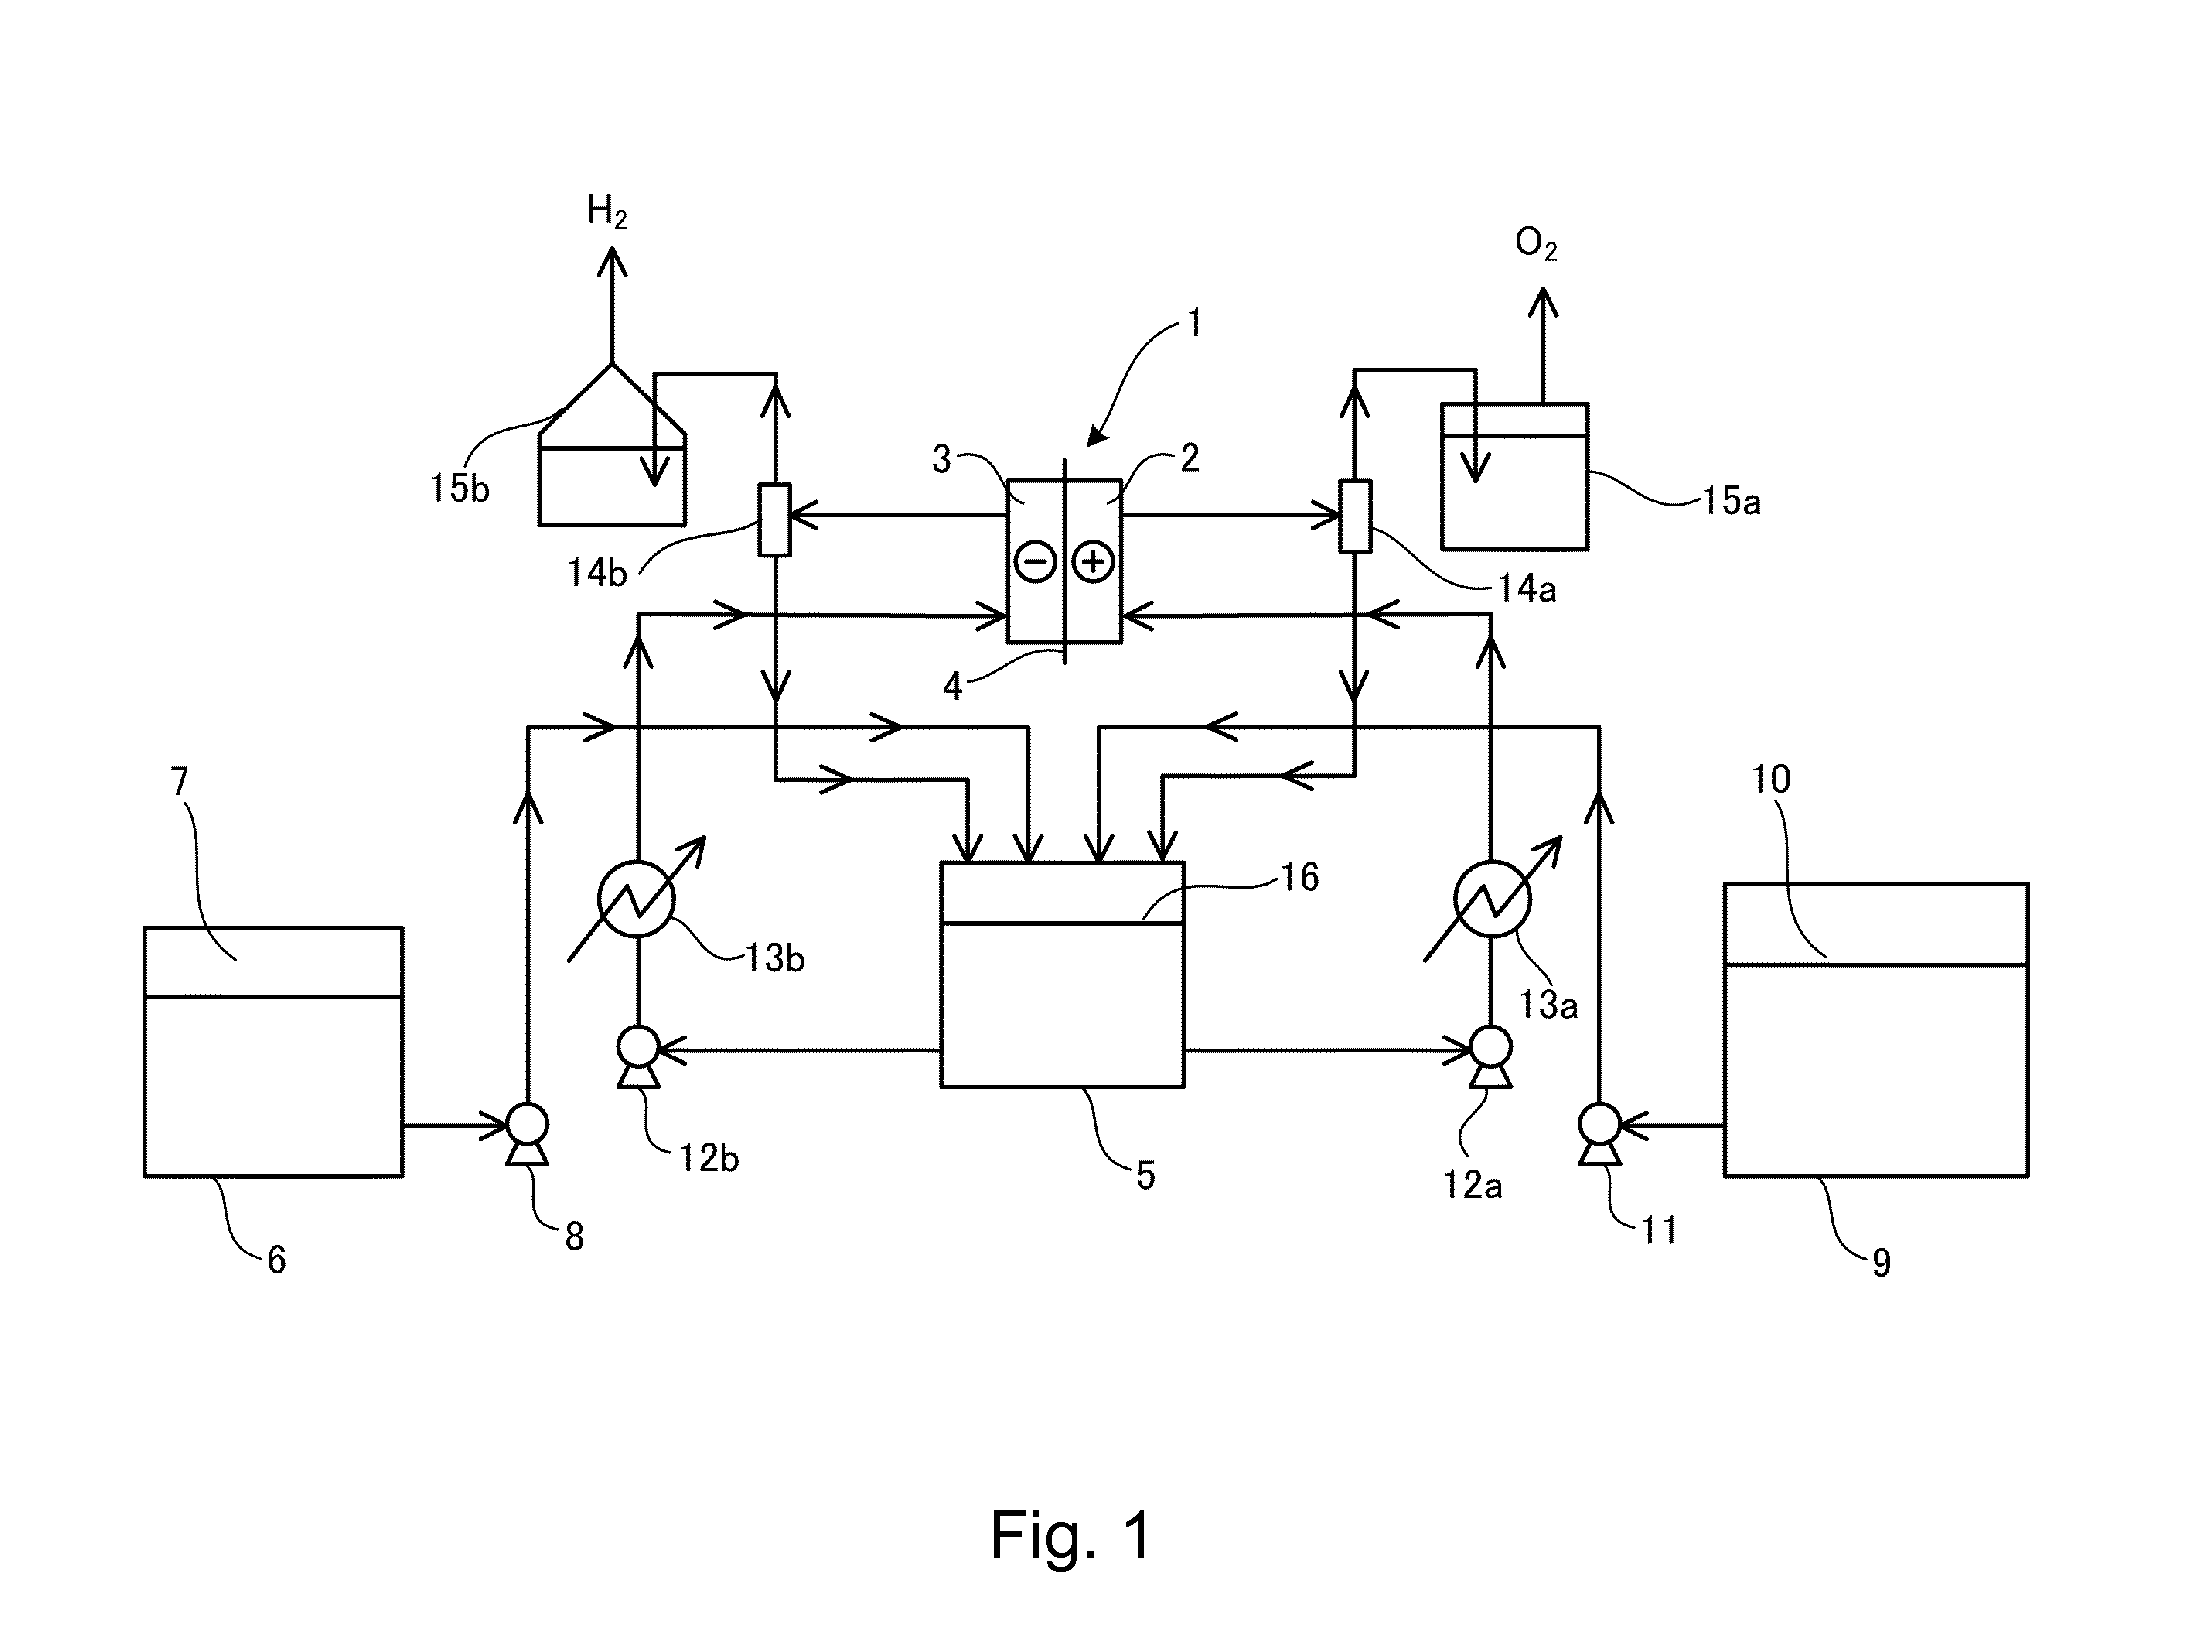 Electrolytic enrichment method for heavy water